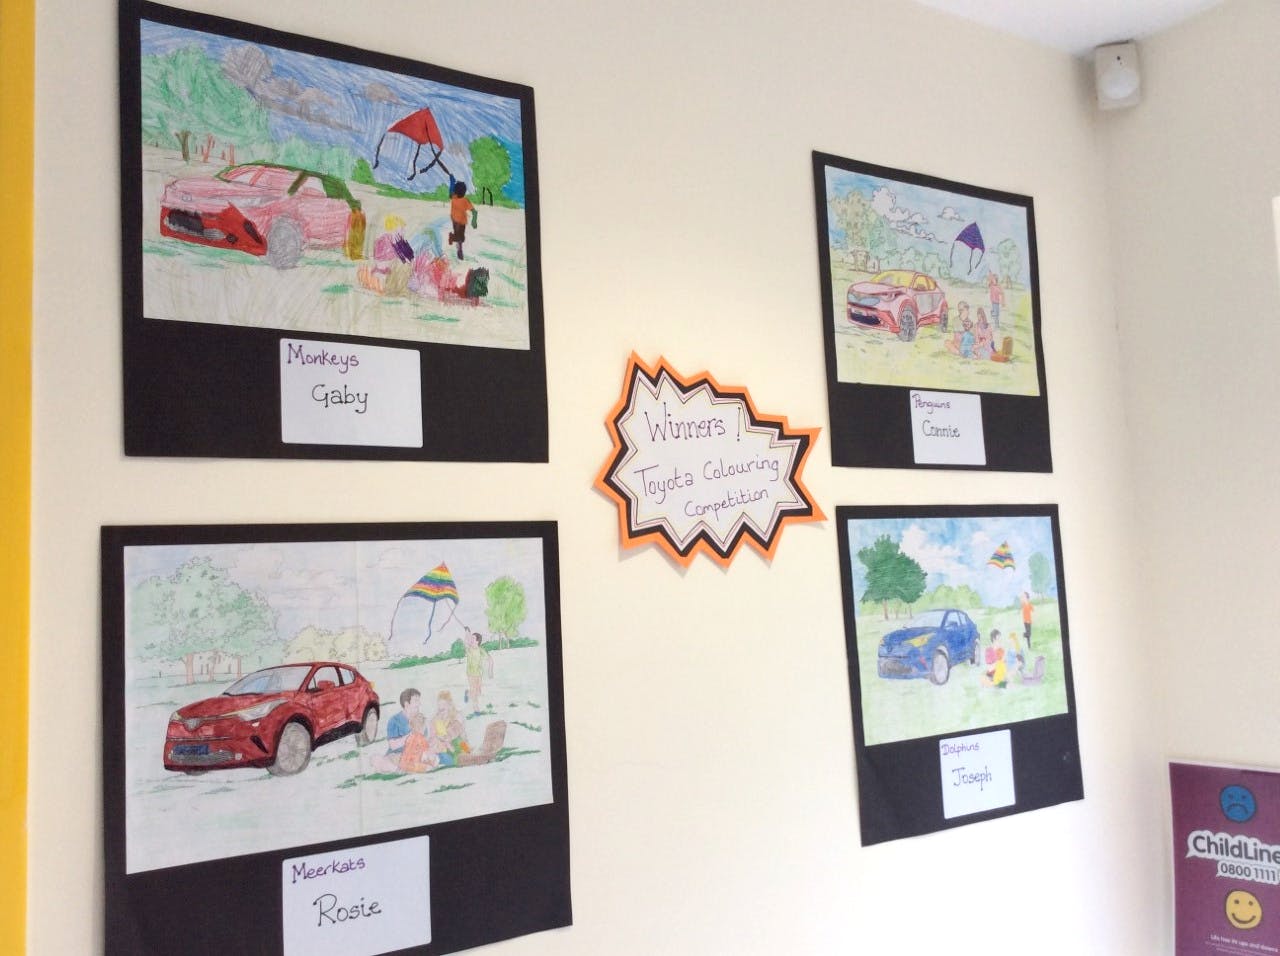 C-HR Colouring Competition